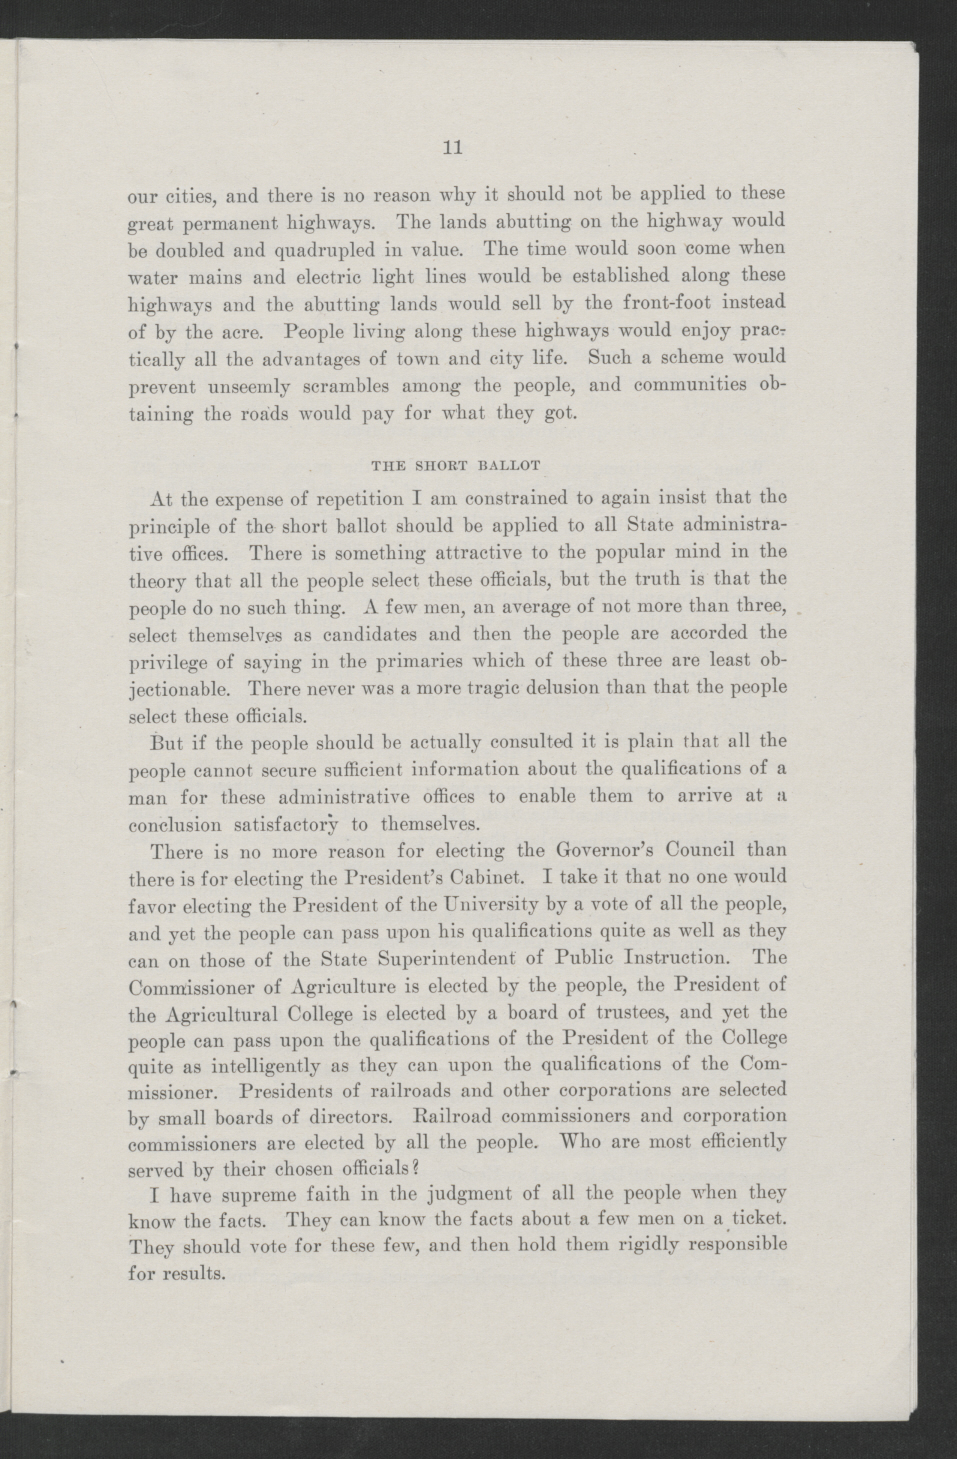 Biennial Message of Governor Thomas W. Bickett to the General Assembly, January 9, 1919, page 9